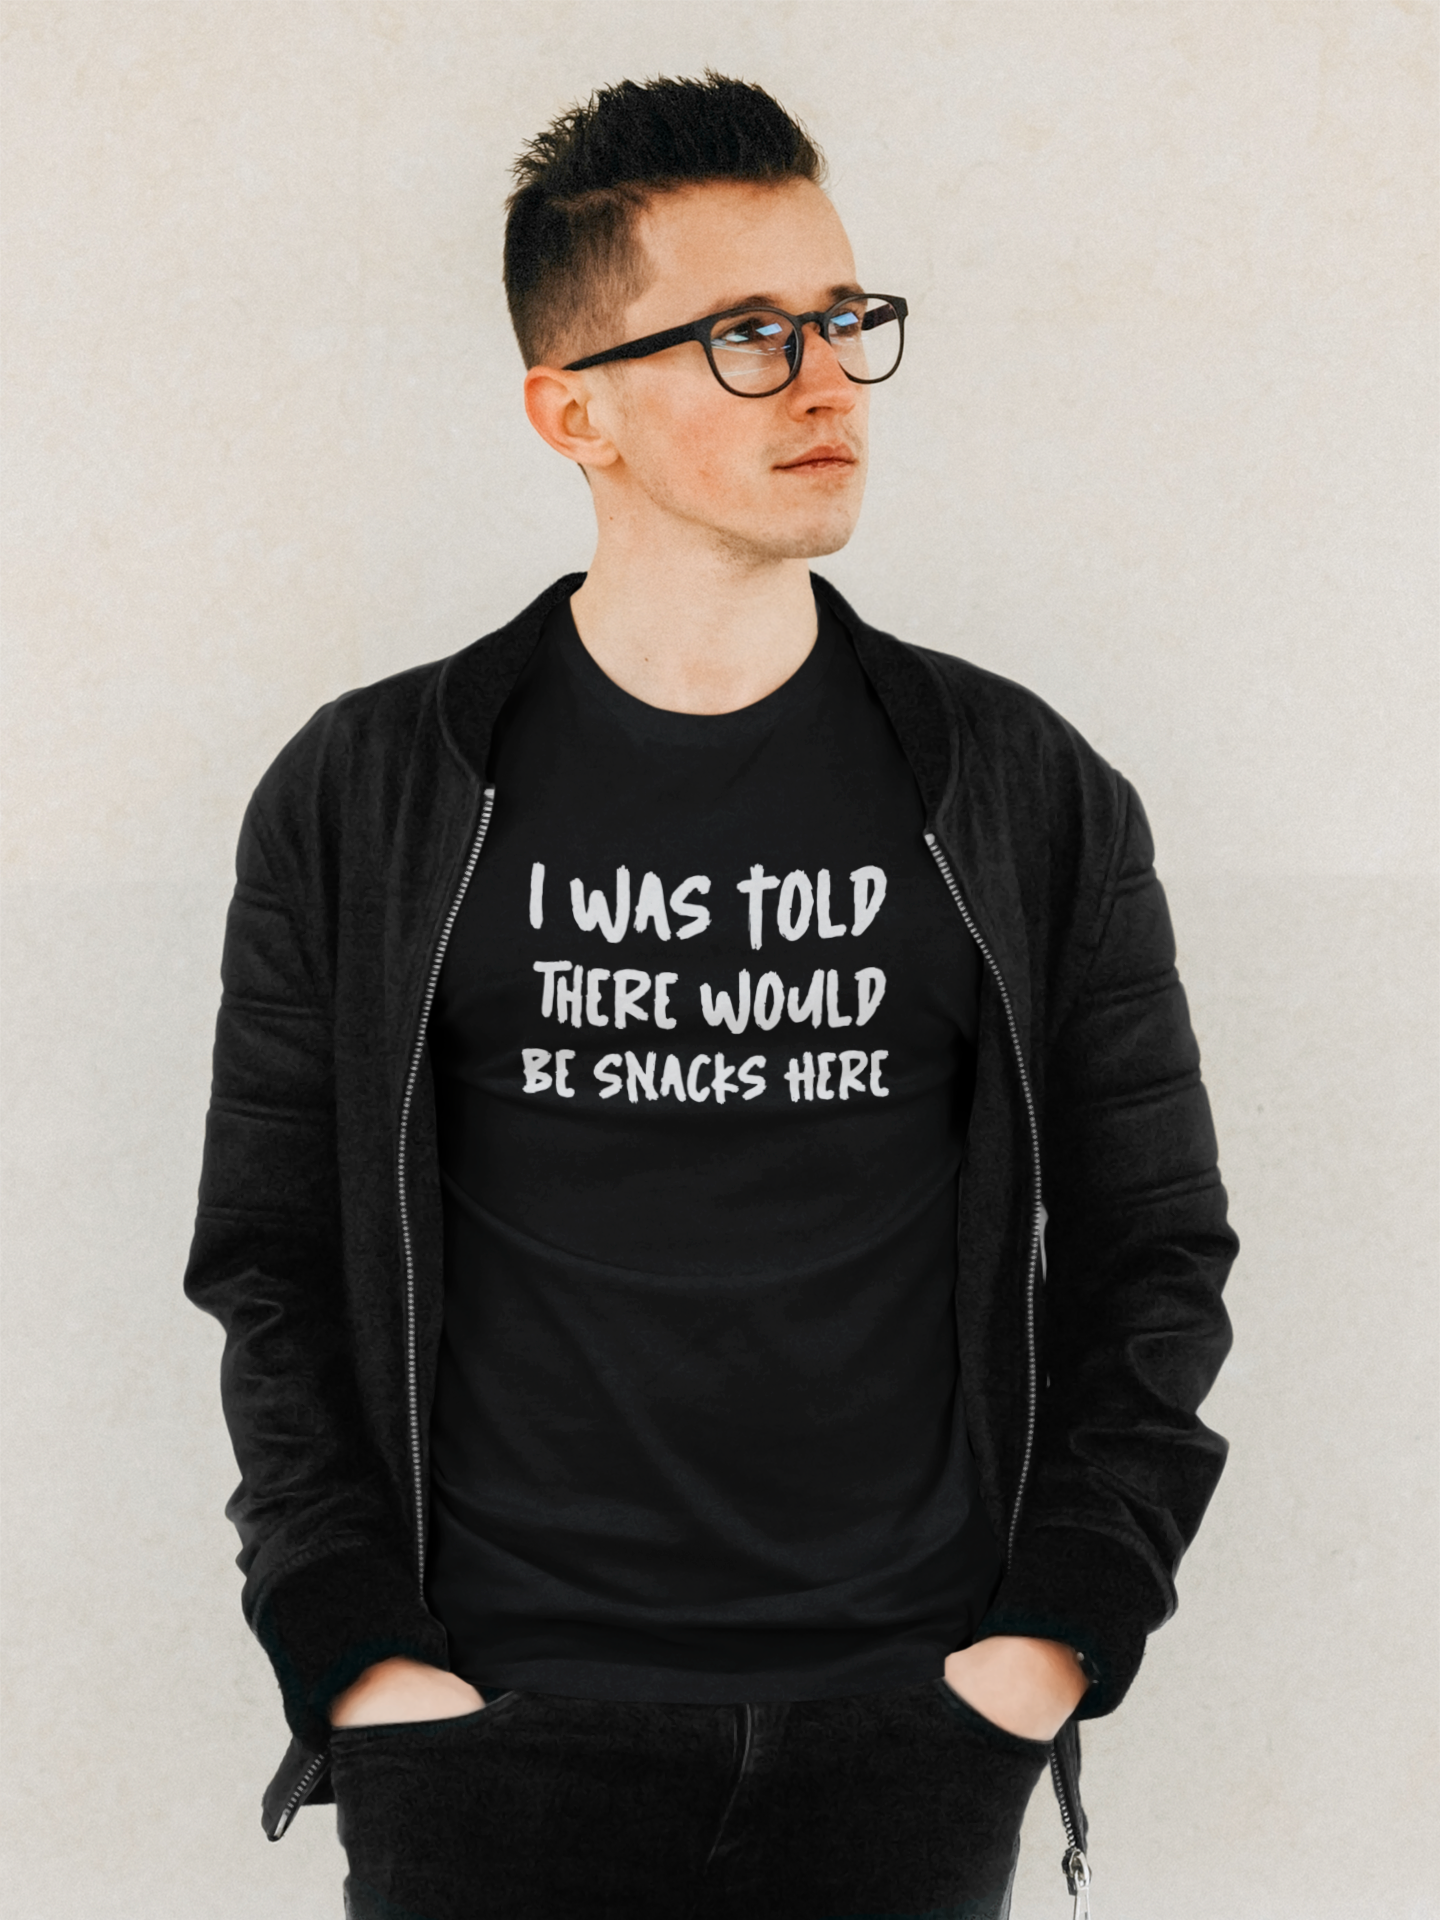 I was told there would be snacks here -  Obnoxious Apparel - Funny Offensive Shirts for Men